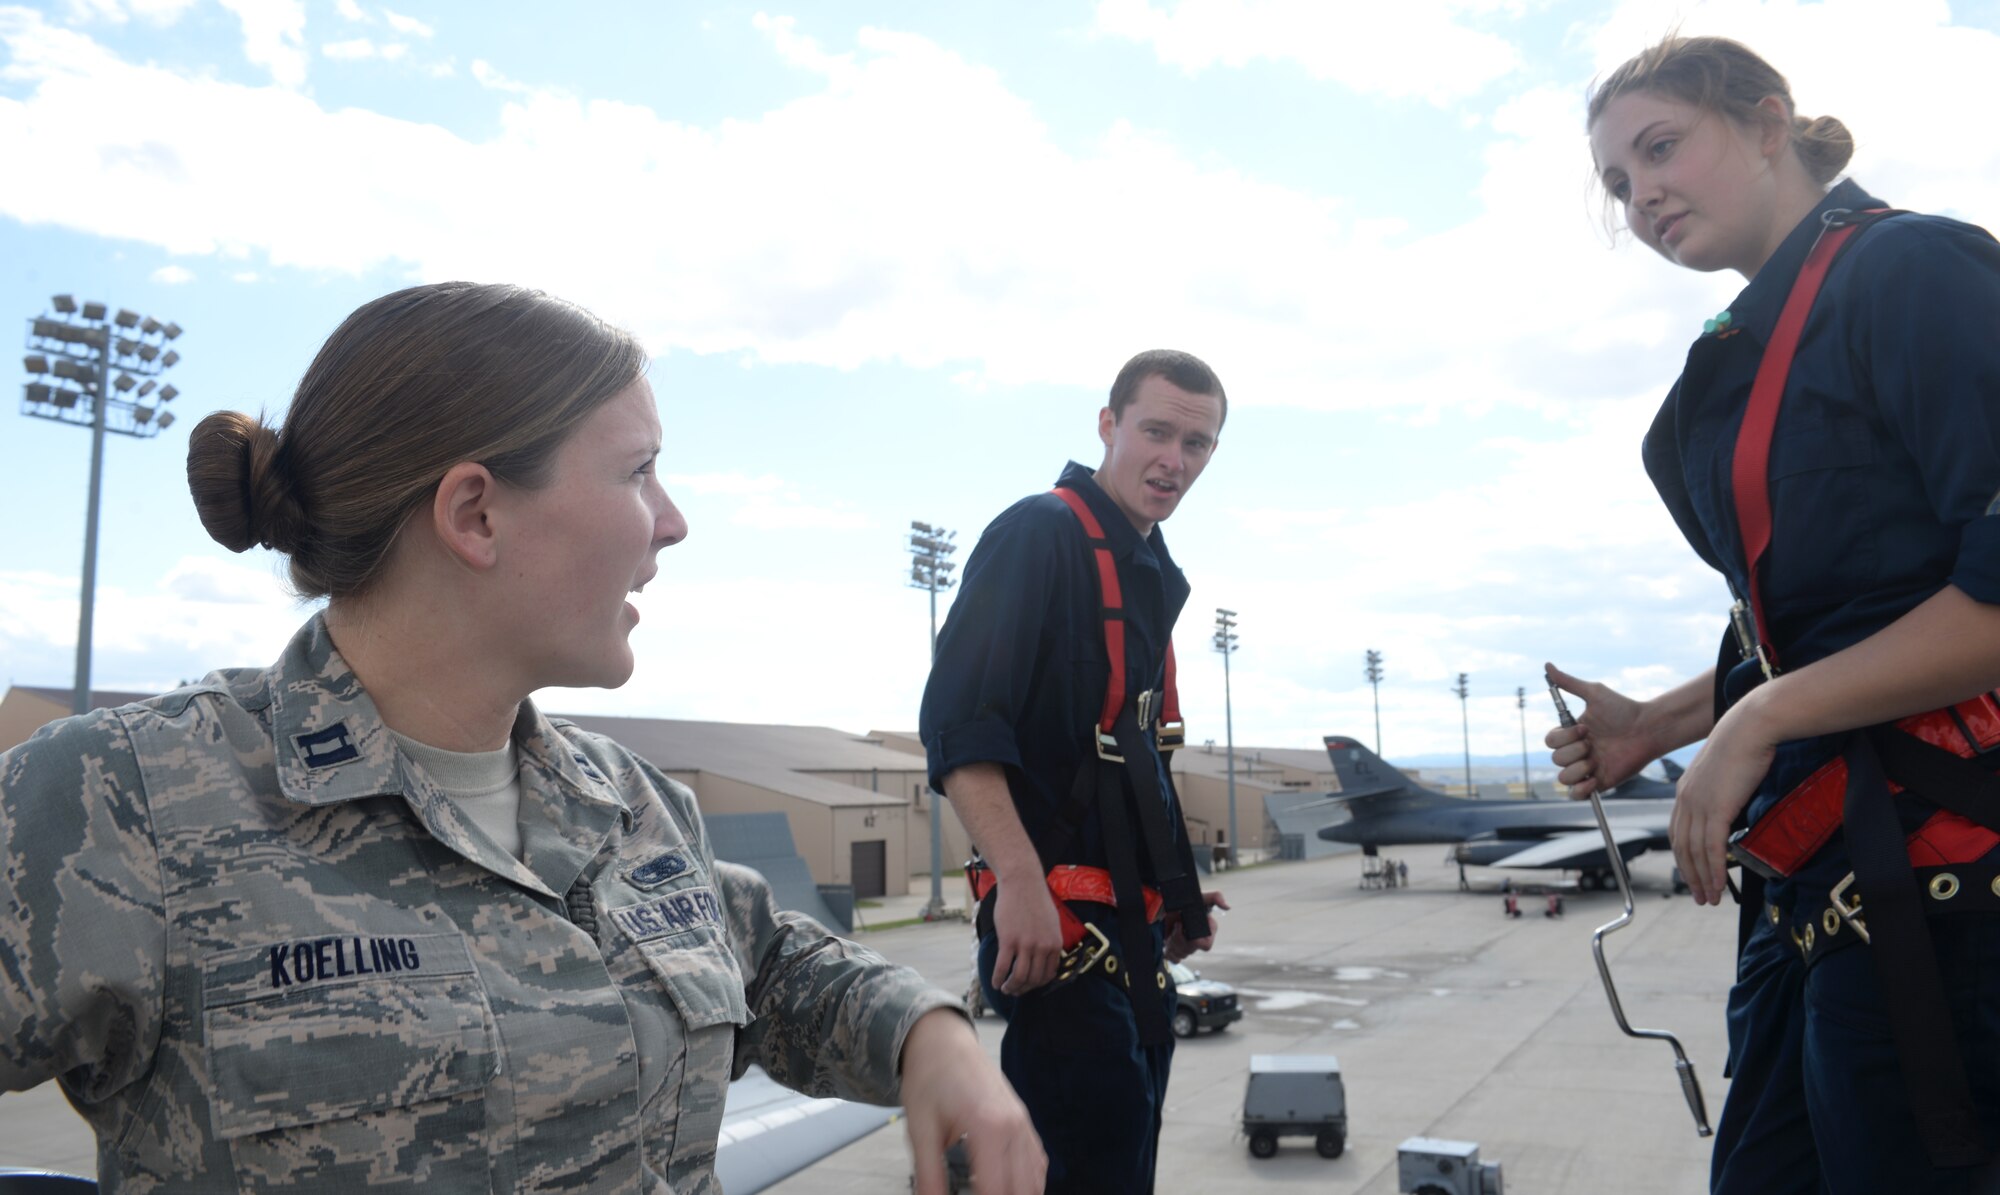 Capt. Lacey Koelling, officer in charge of the 34th Aircraft Maintenance Unit, talks to Airmen 1st Class Preston Schroeder and Kristy Urban, electro environmental systems specialists assigned to the 28th Aircraft Maintenance Squadron, at Ellsworth Air Force Base, S.D., Sept. 26, 2017. Koelling likes to engage with her Airmen on the flightline and see what her Airmen are working on. (U.S. Air Force photo by Airman 1st Class Thomas Karol)